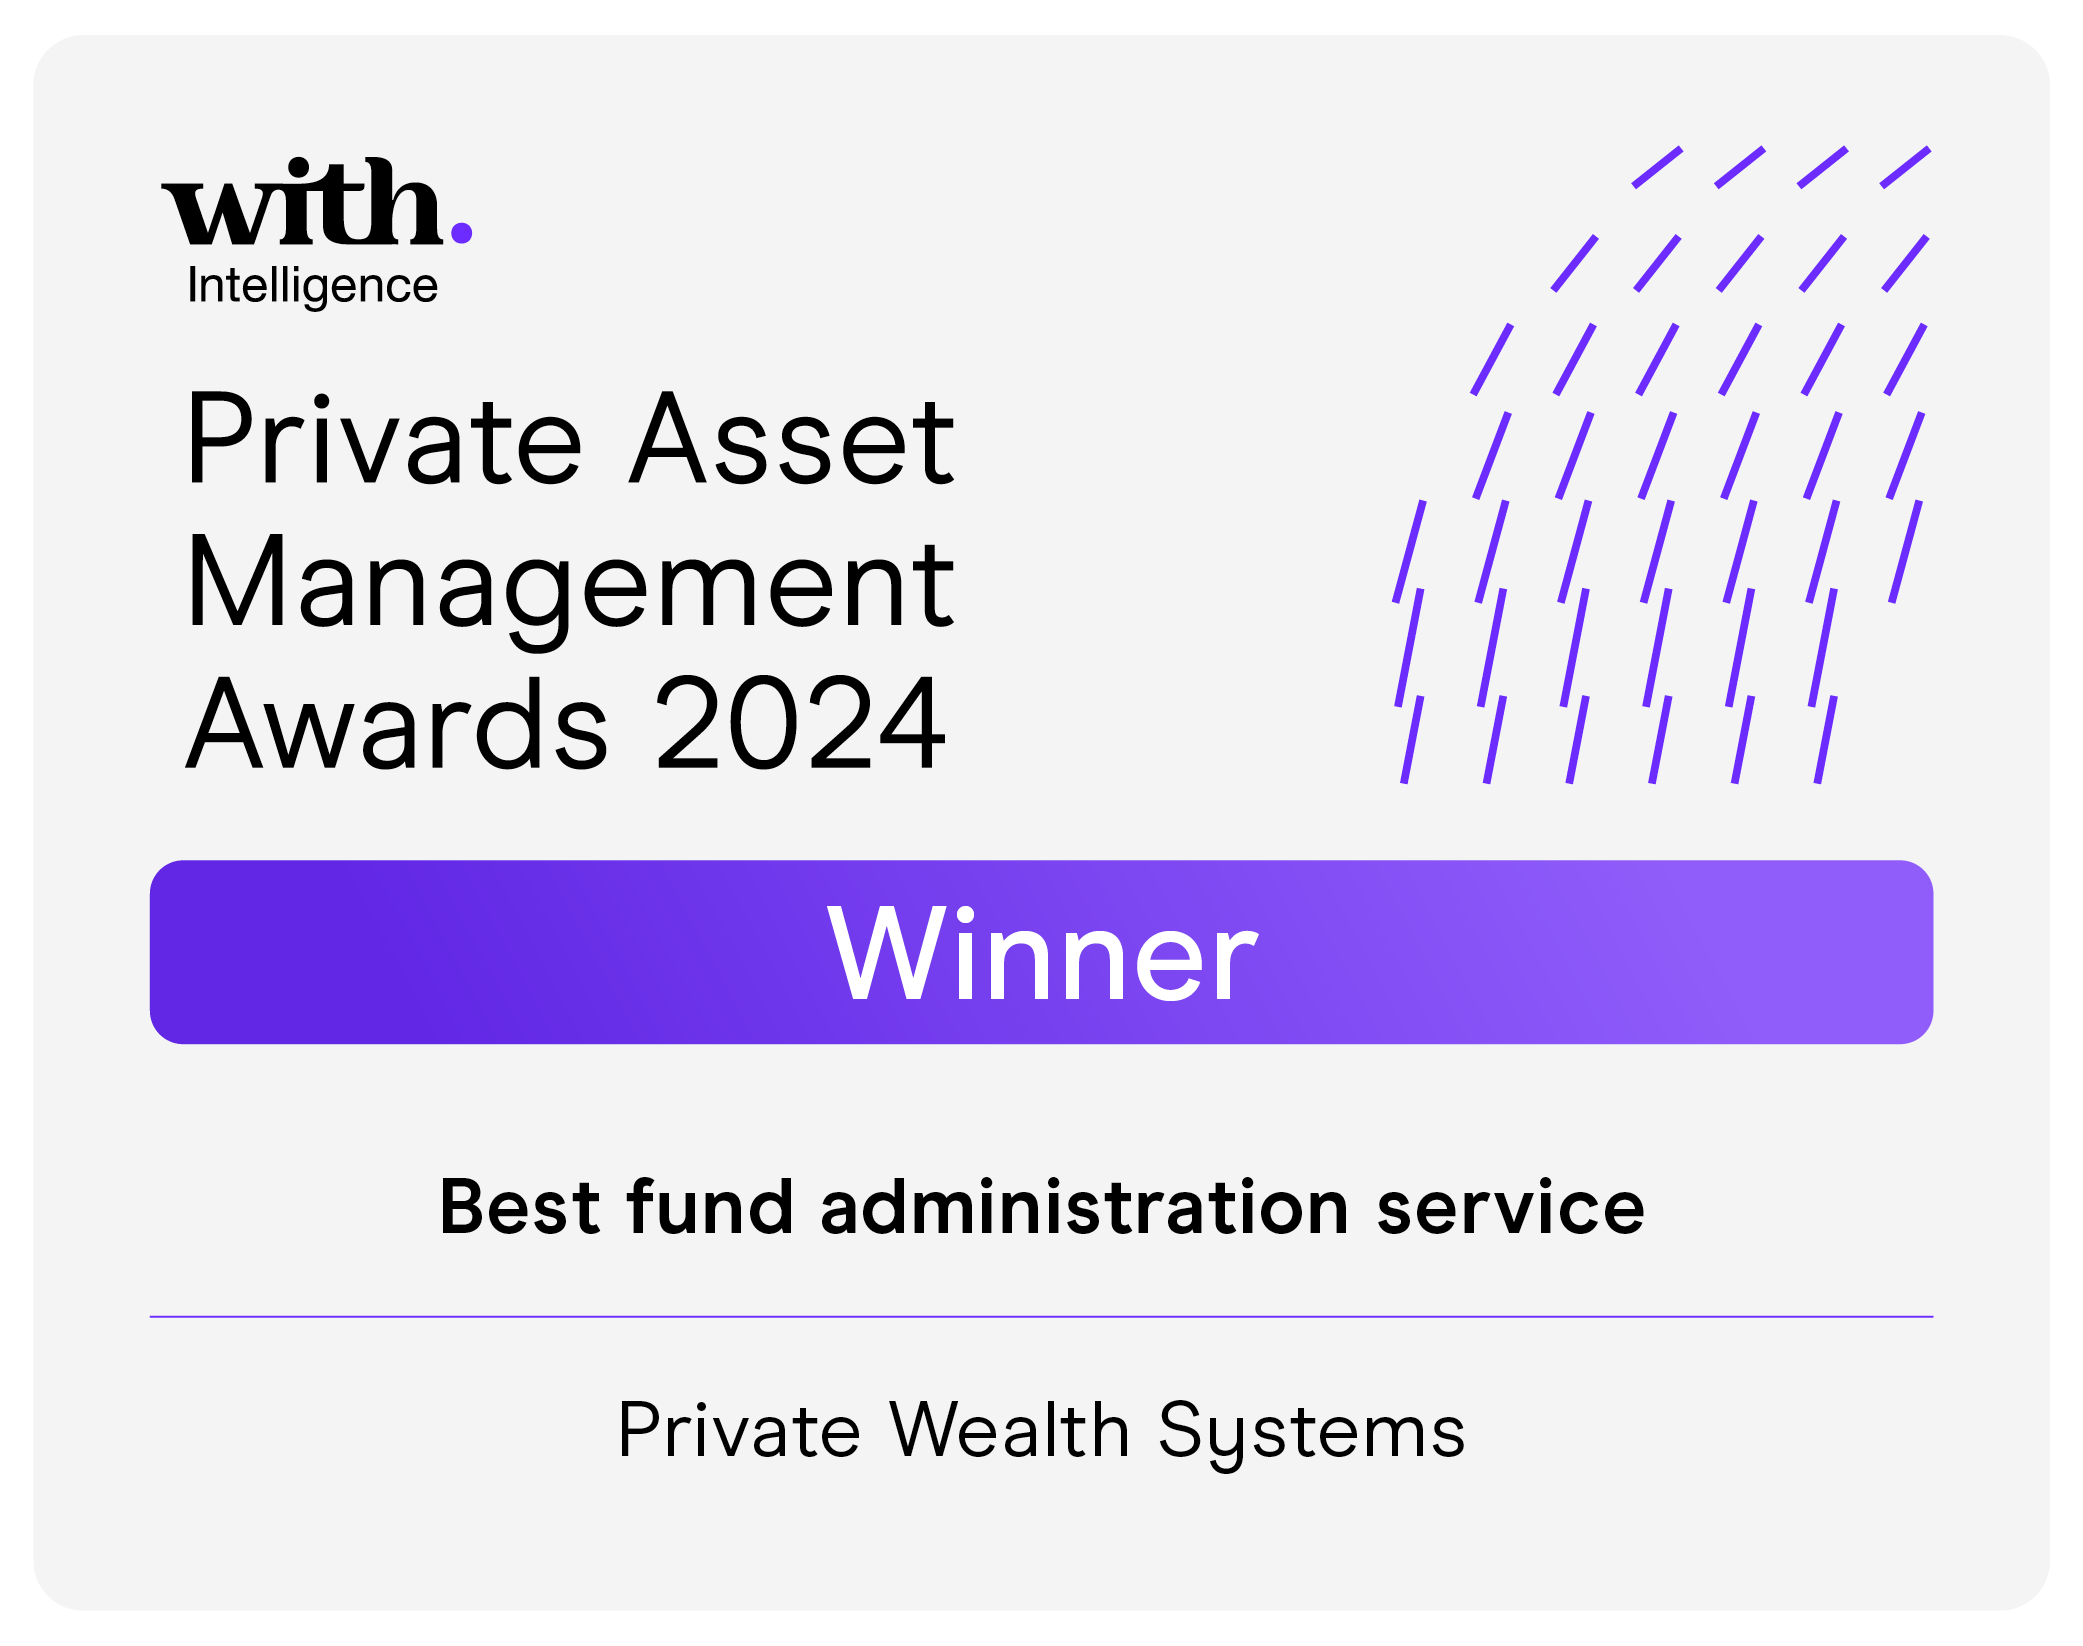 PAM Awards 2024, Best Fund Administration